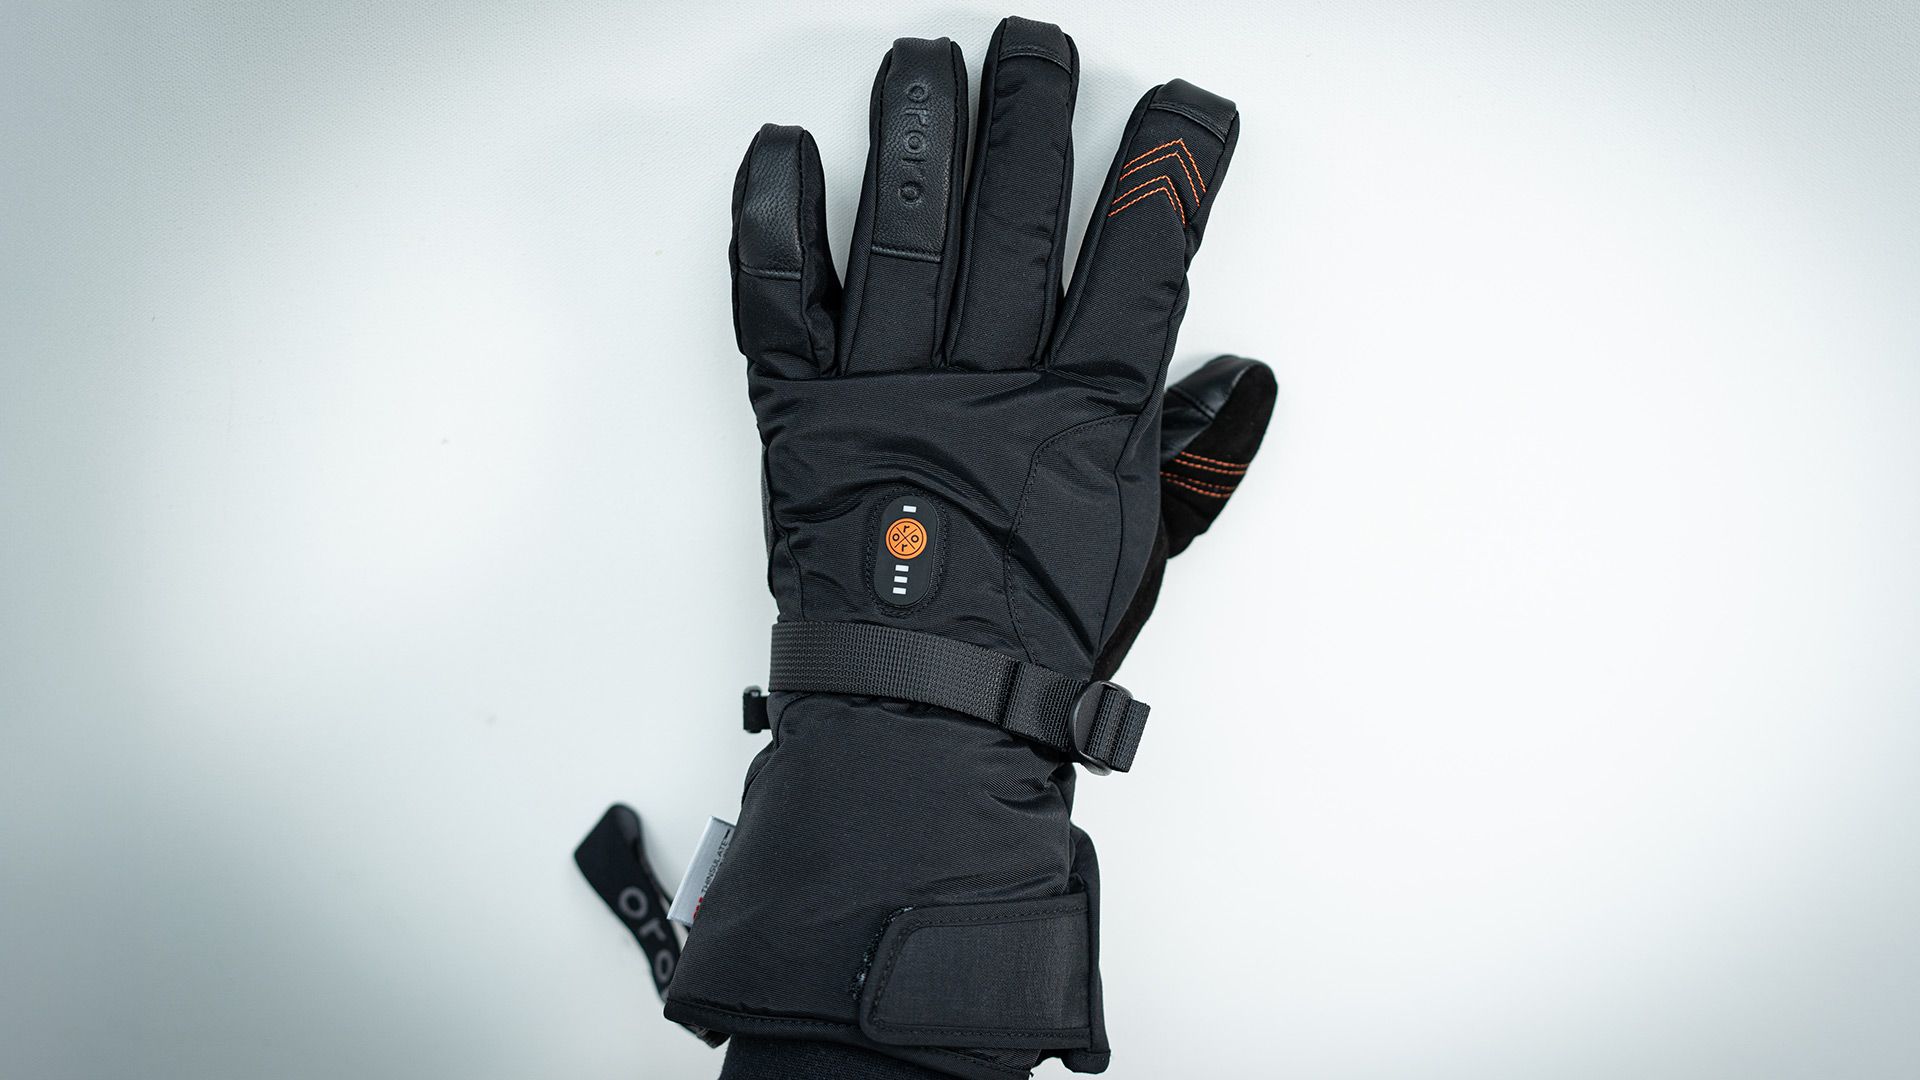 Photograph of ORORO Heated Gloves backside, power button, wrist strap and cuff strap.